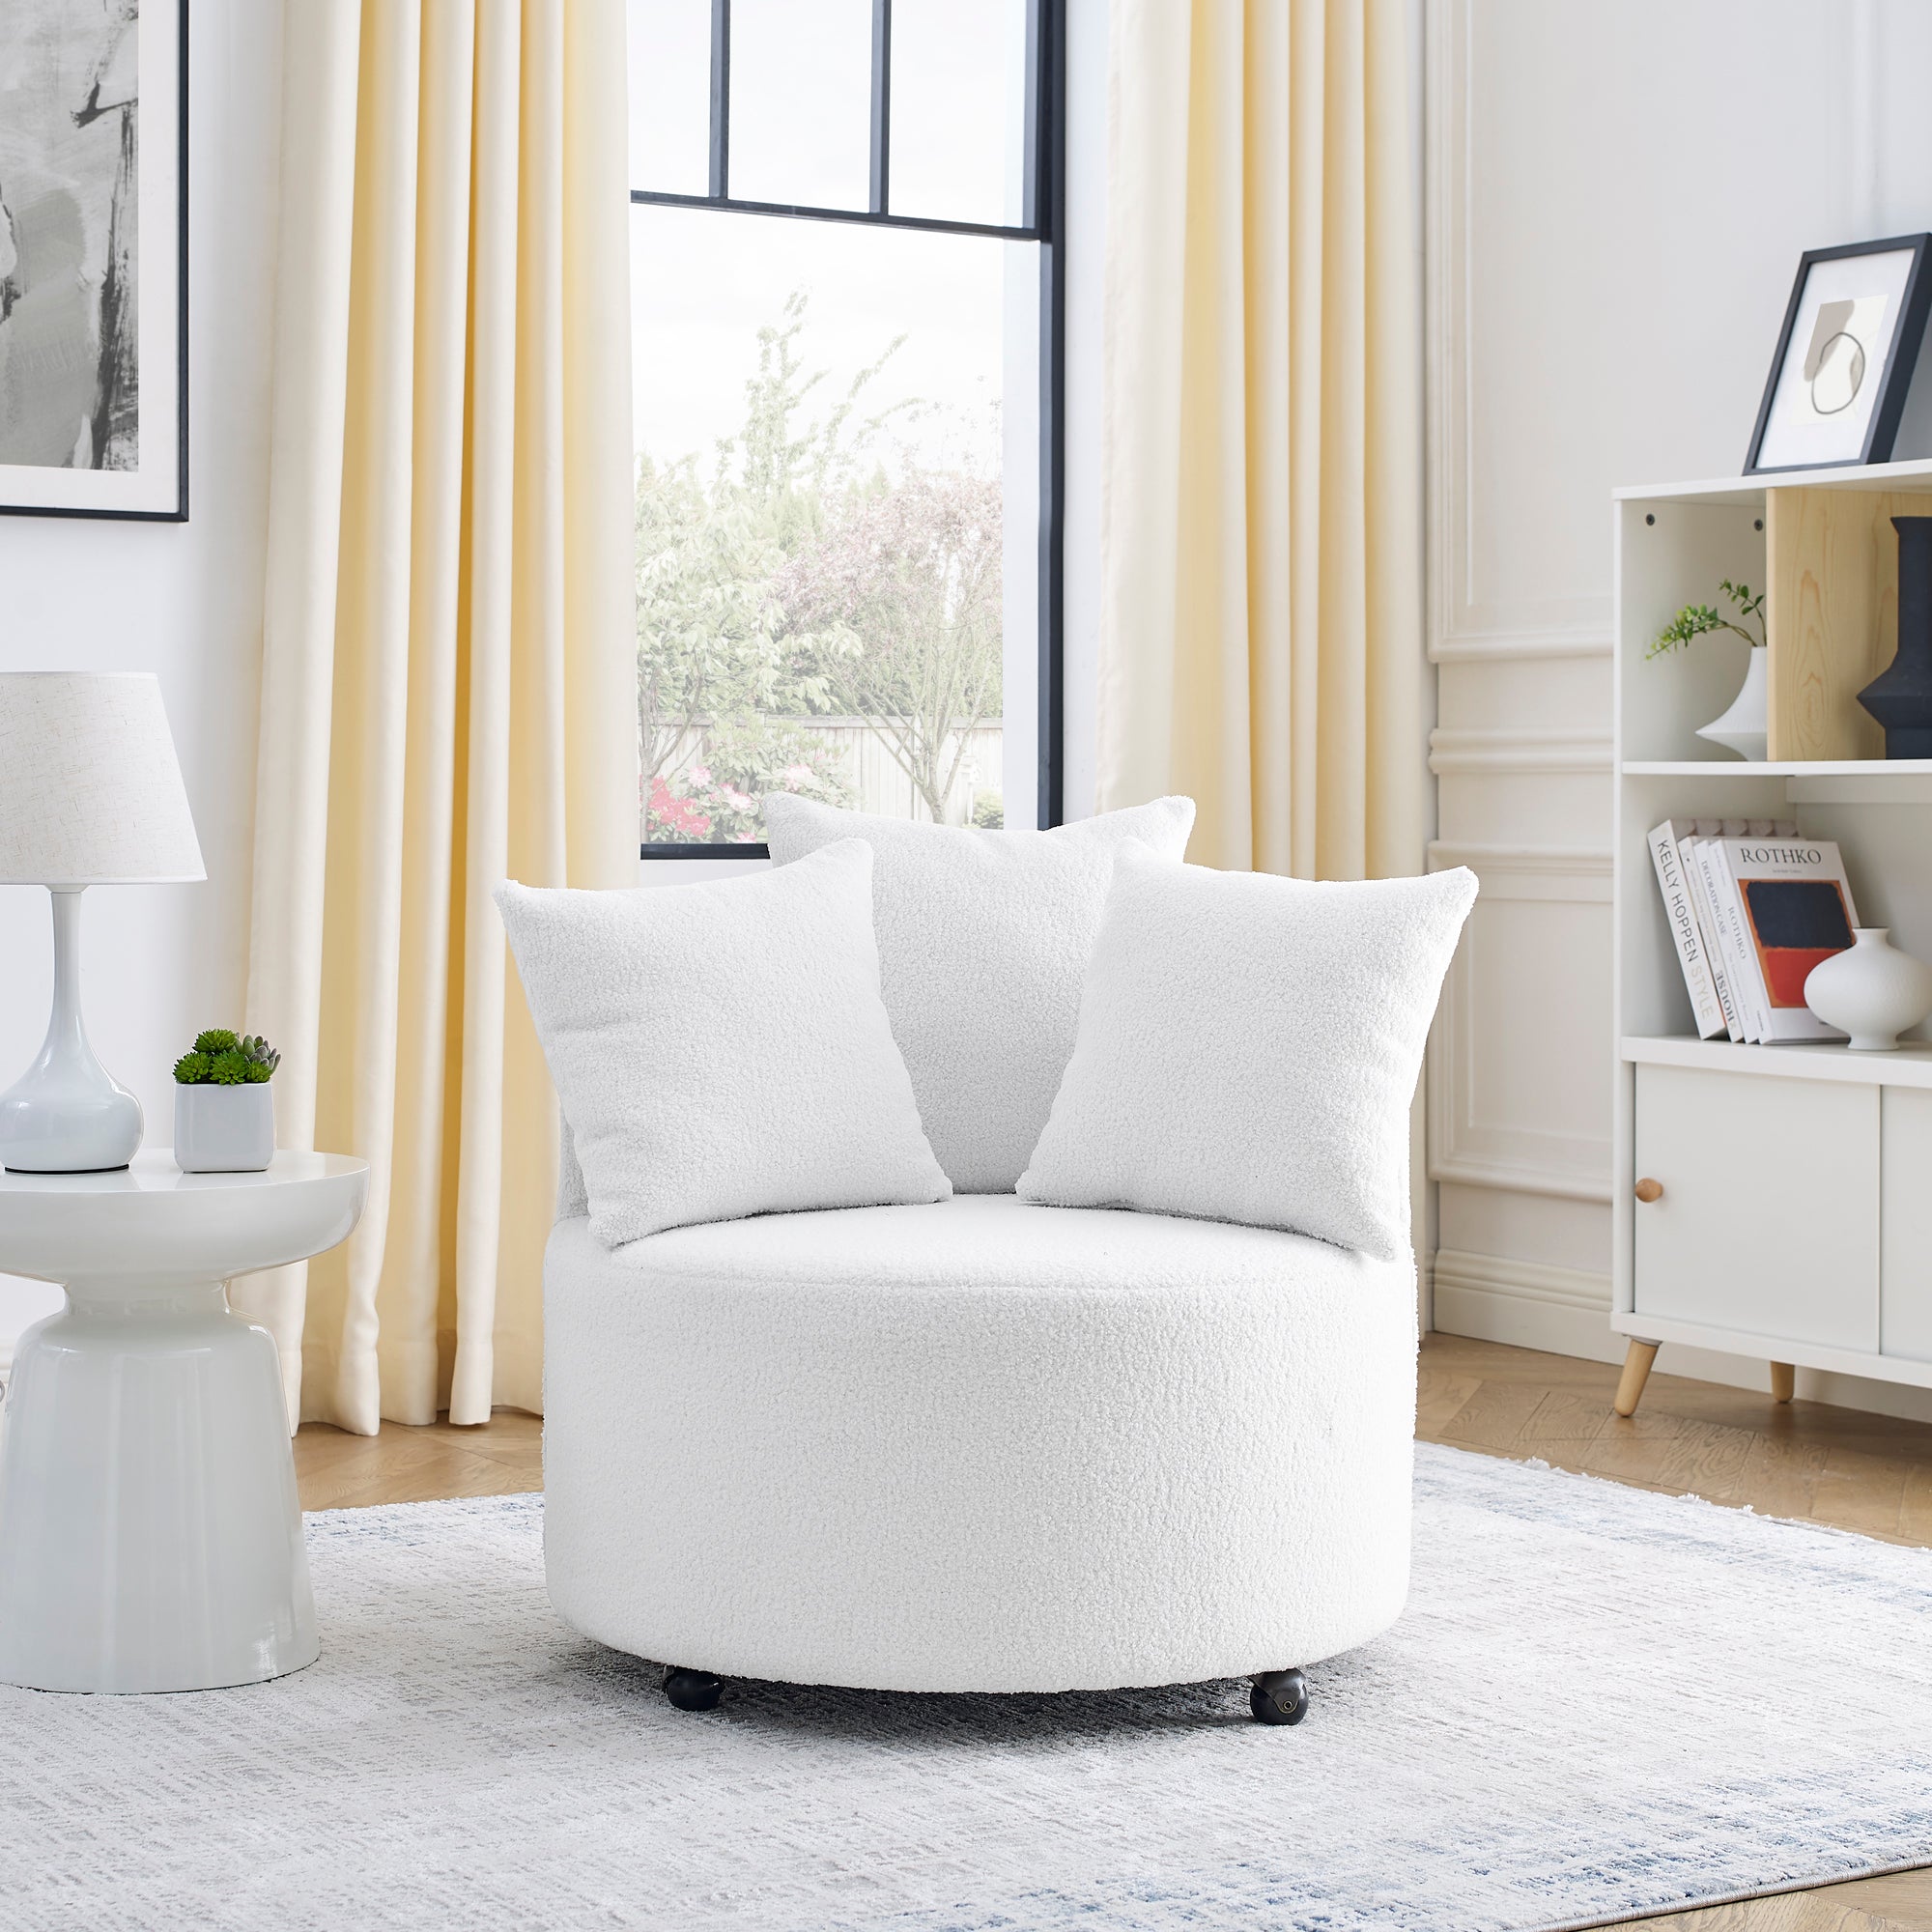 Teddy Fabric Swivel Accent Backchair Upholstered Luxury Lounge Chair with Movable Wheels, Including 3 Pillows - White